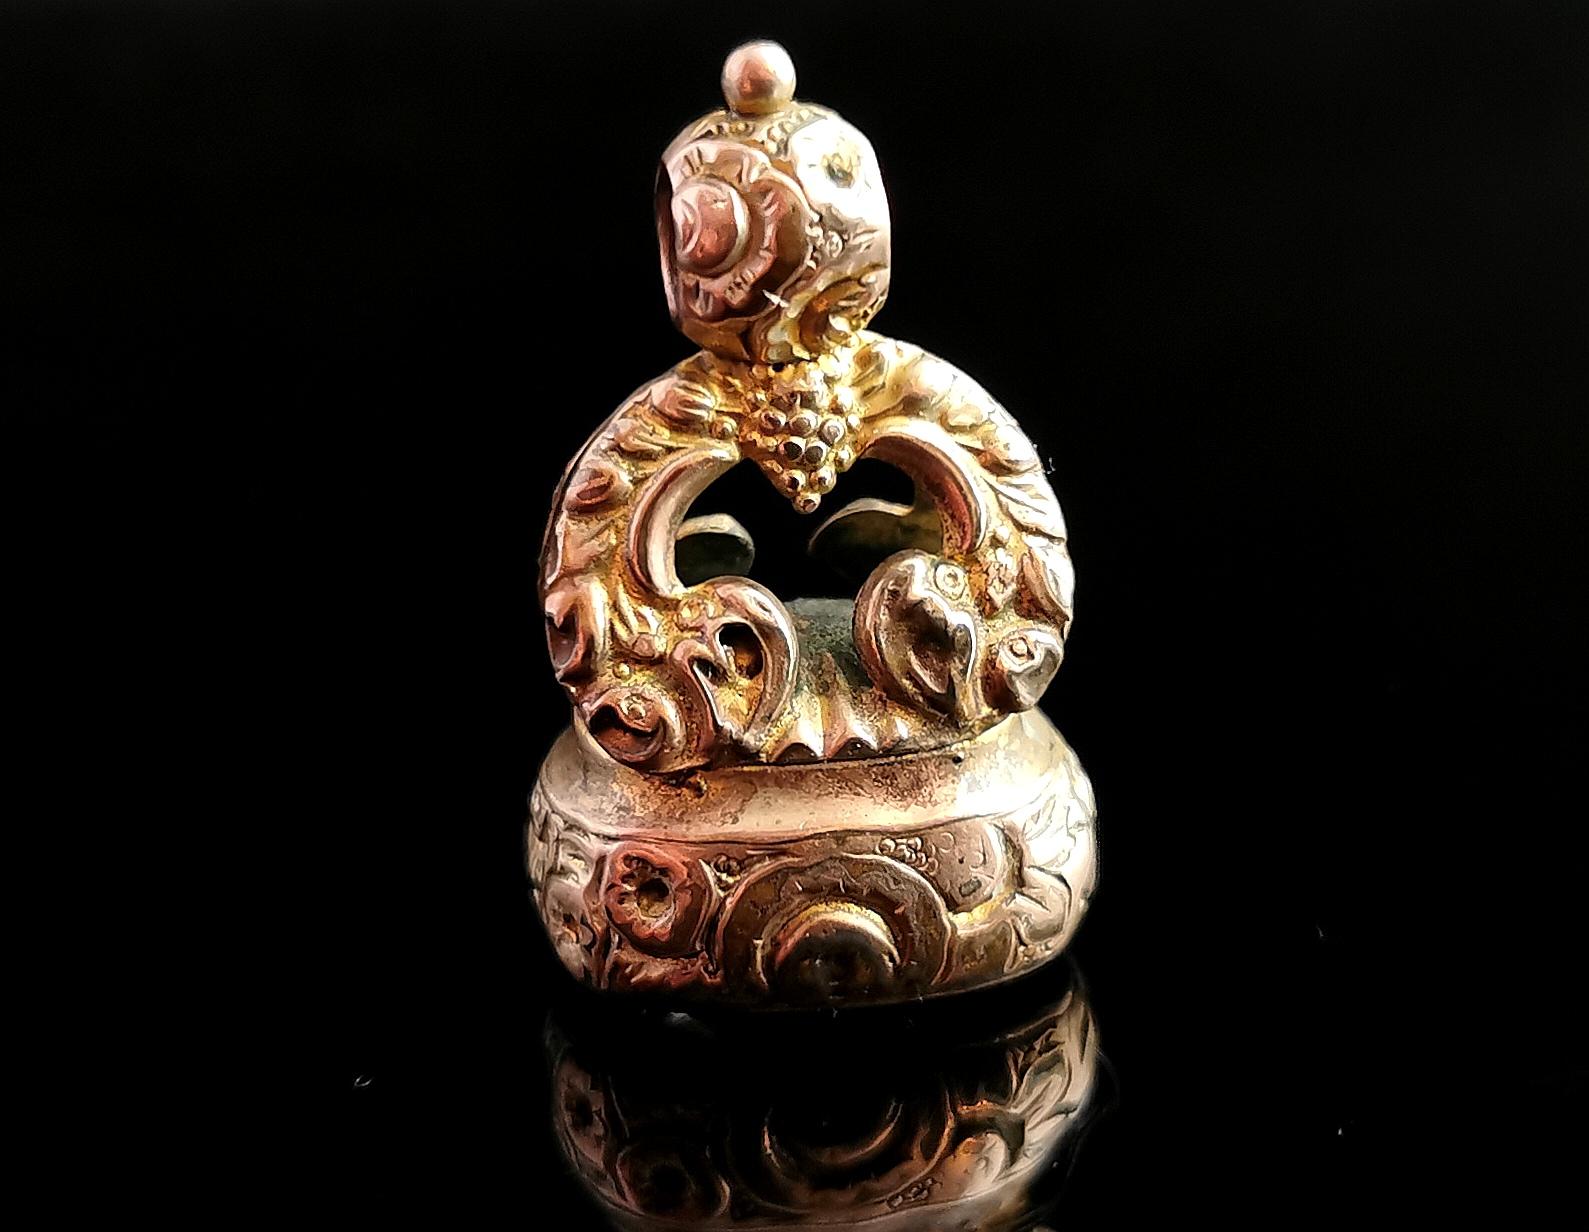 A beautiful antique, late Georgian 9ct gold plated and carved quartz crystal seal fob.

It is a very decorative seal with an elaborate chased and engraved style, scrolling arches and a bunch of grapes above the centre.

The seal fob is made from